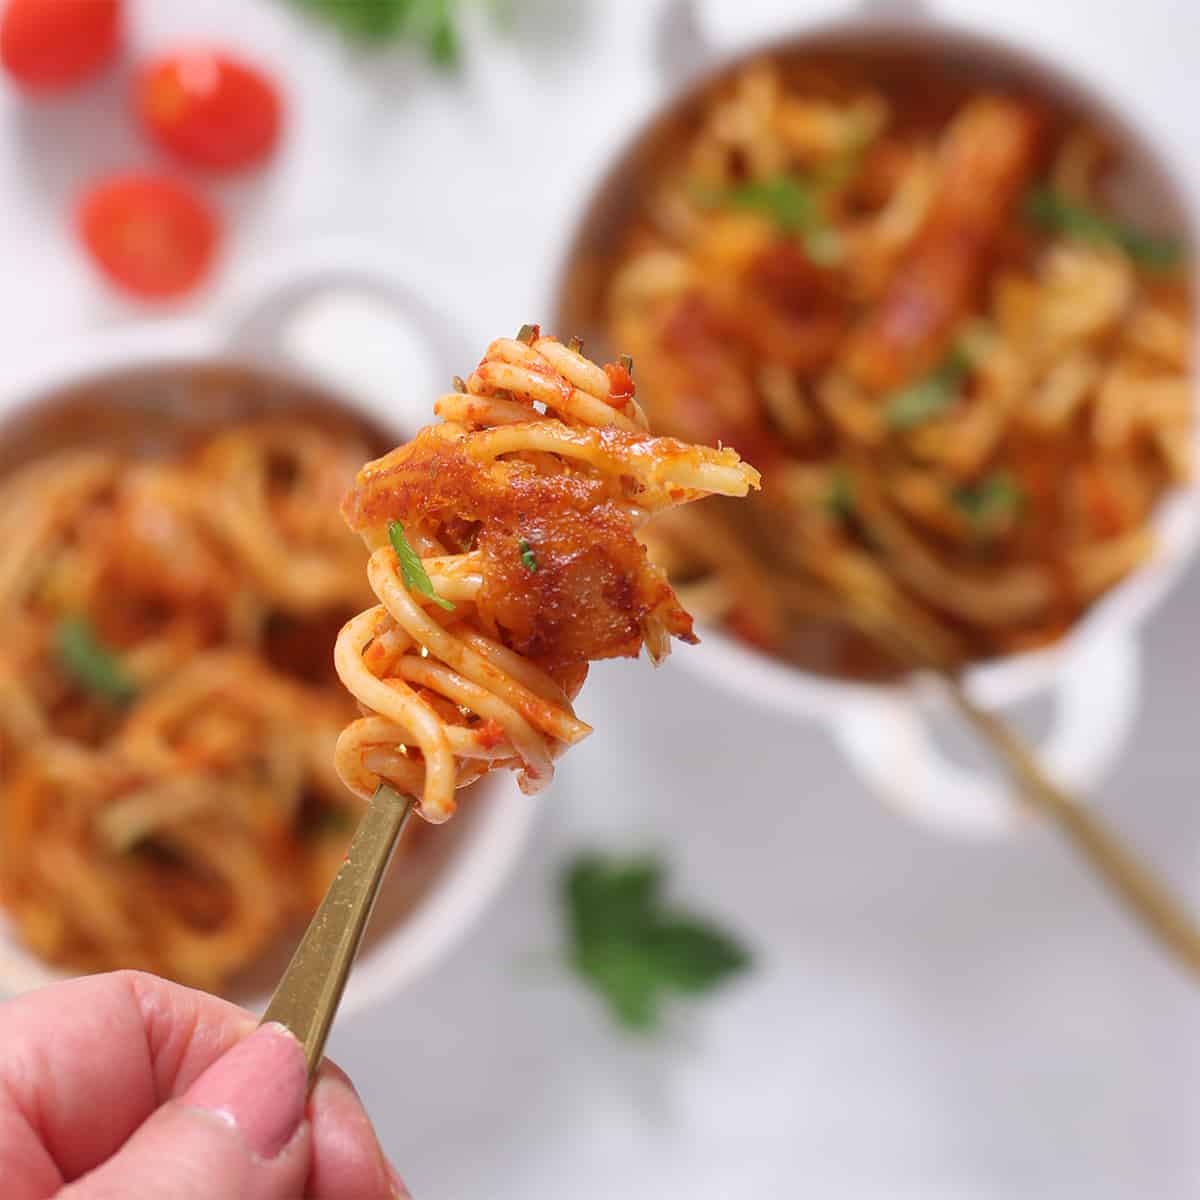 a forkful of fried spaghetti with crispy melted cheese.